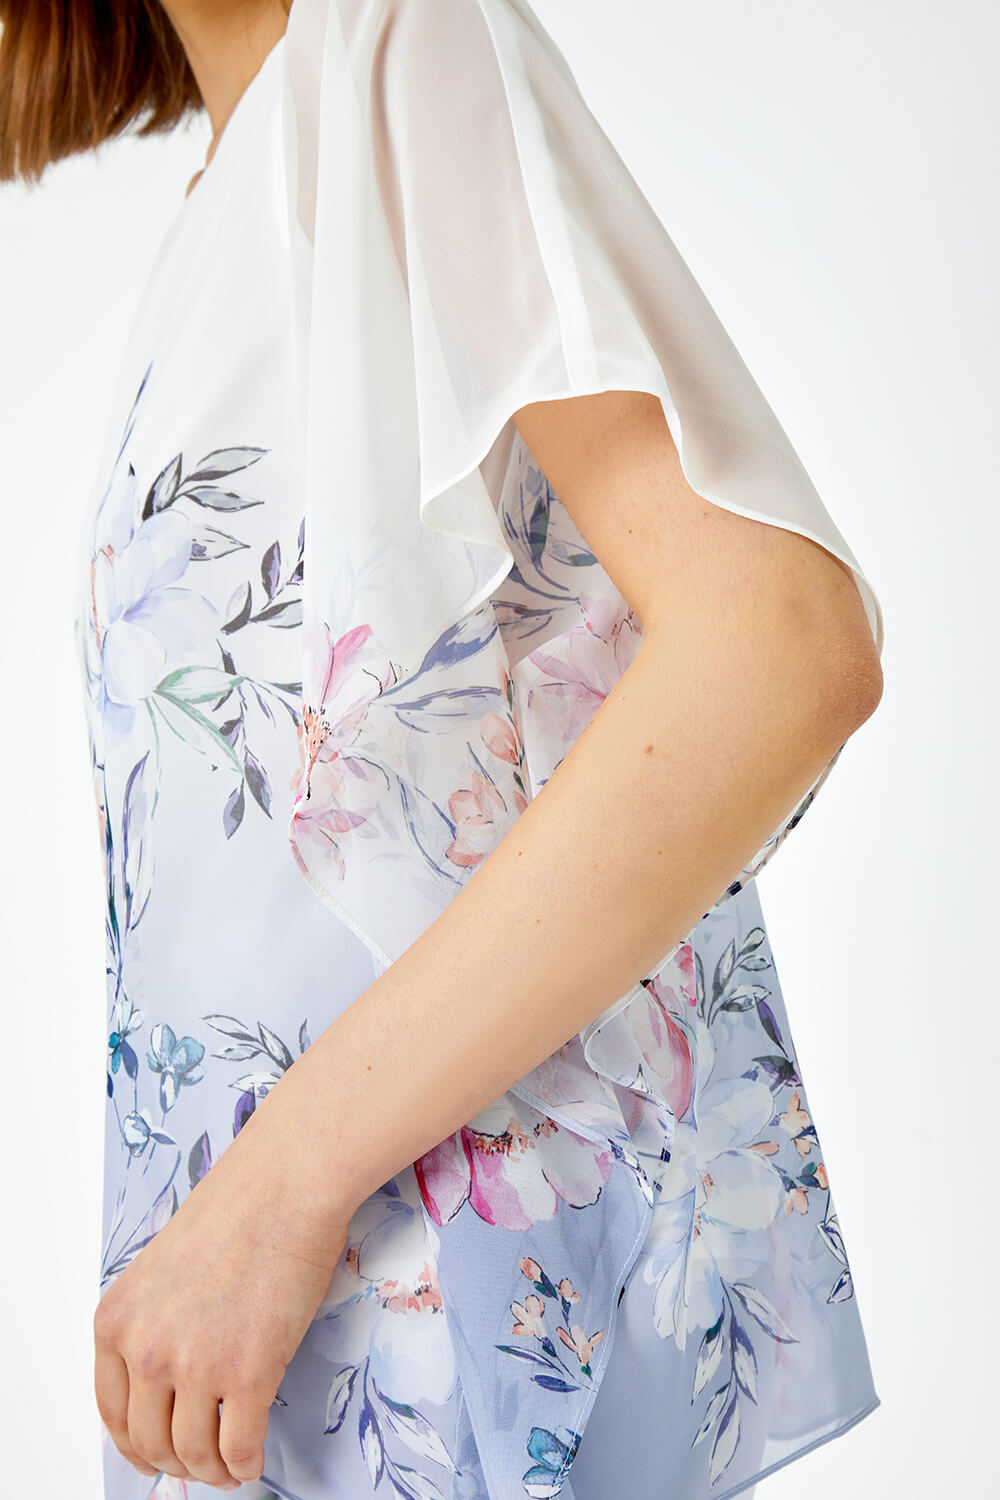 Lavender Floral Print Chiffon Overlay Top, Image 5 of 5